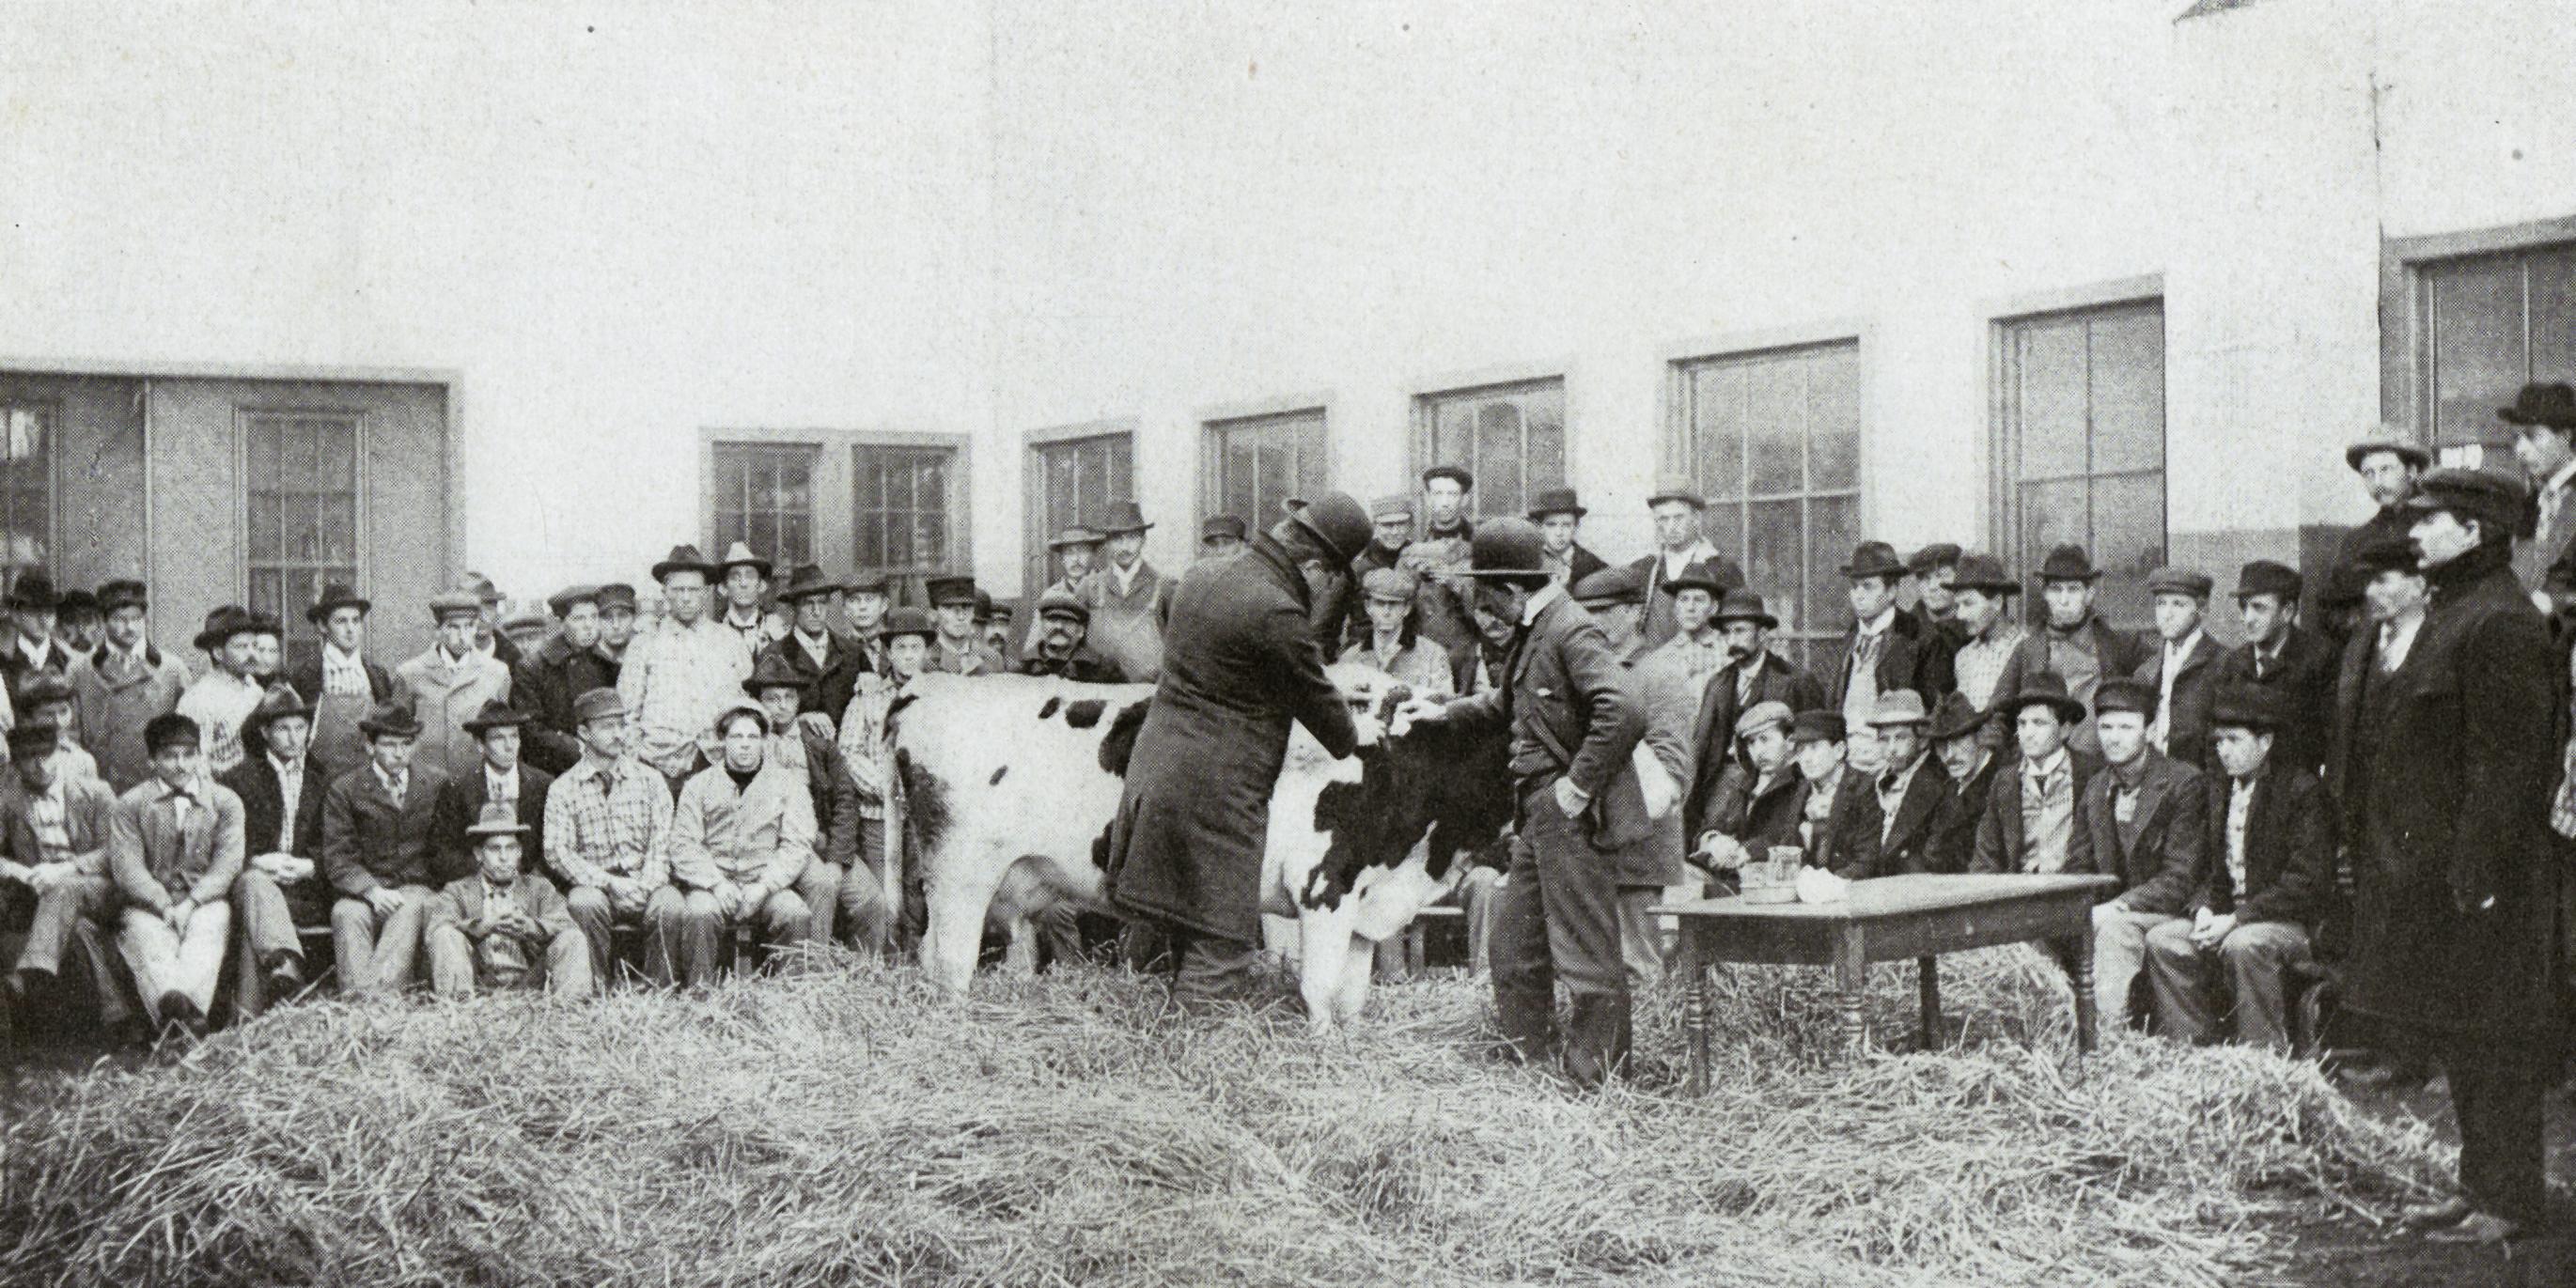 Testing cows for tuberculosis